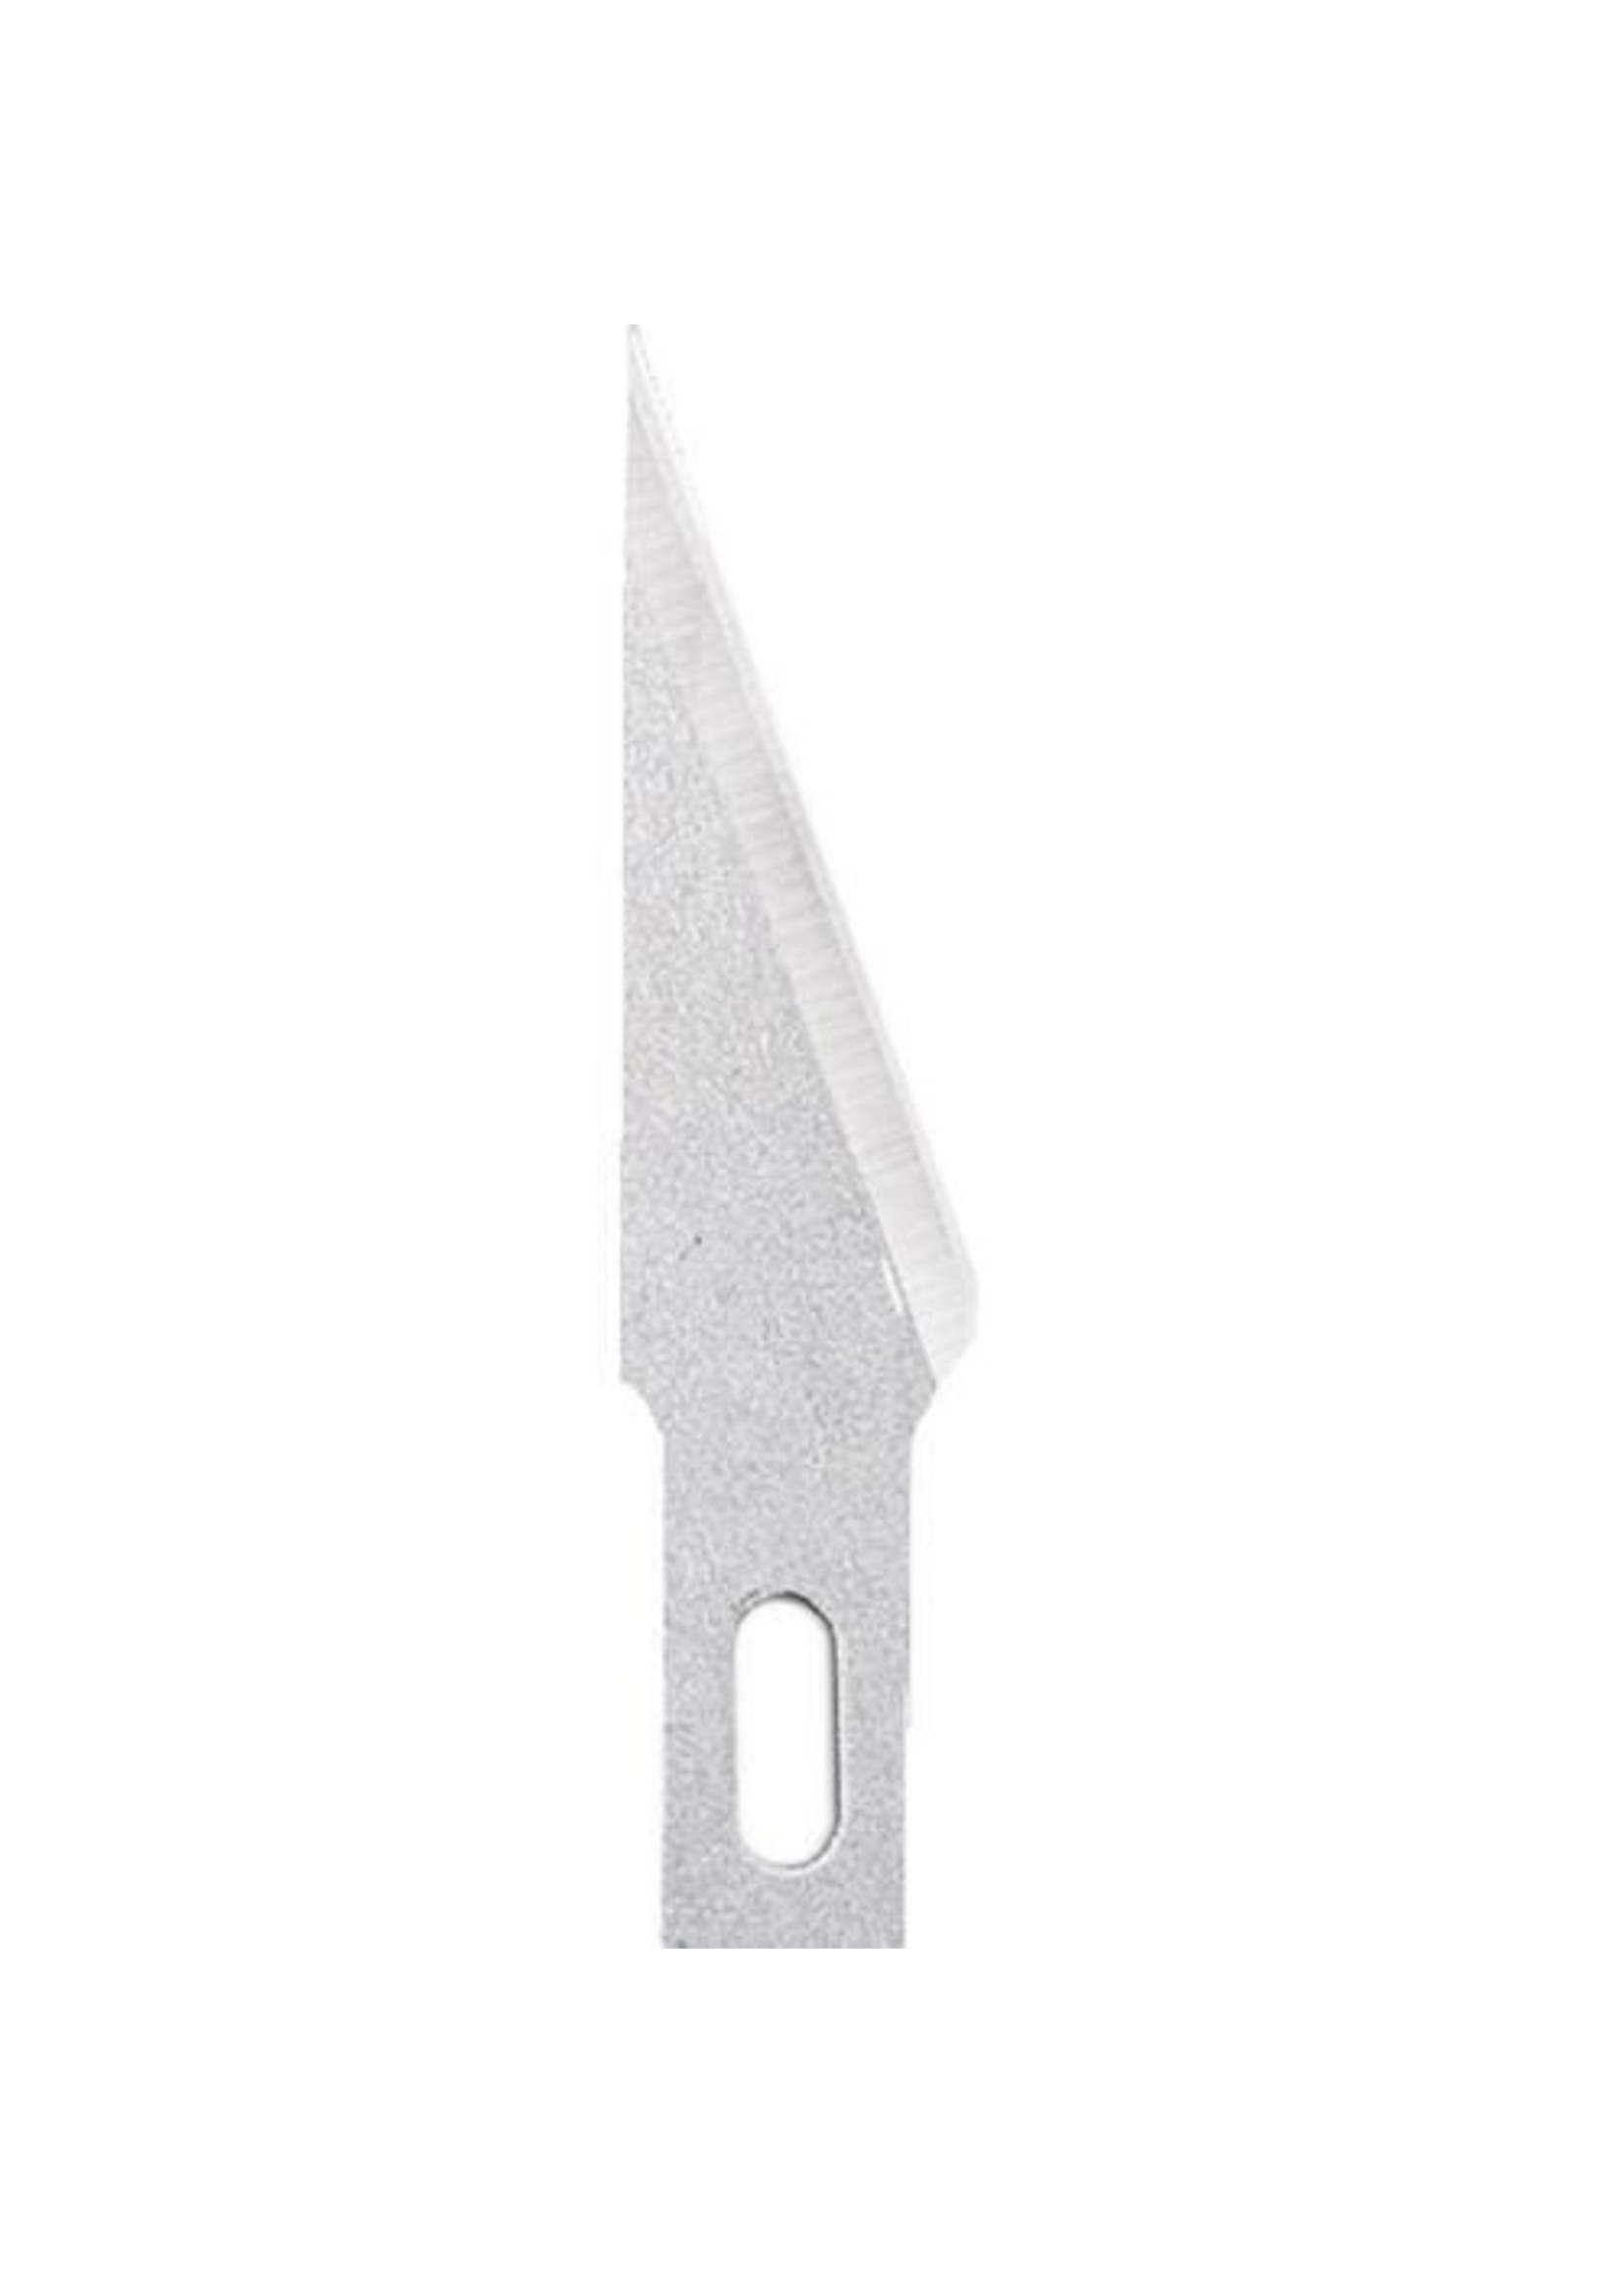 Excel 20021 - #21 Replacement Straight Edge Blades (5)